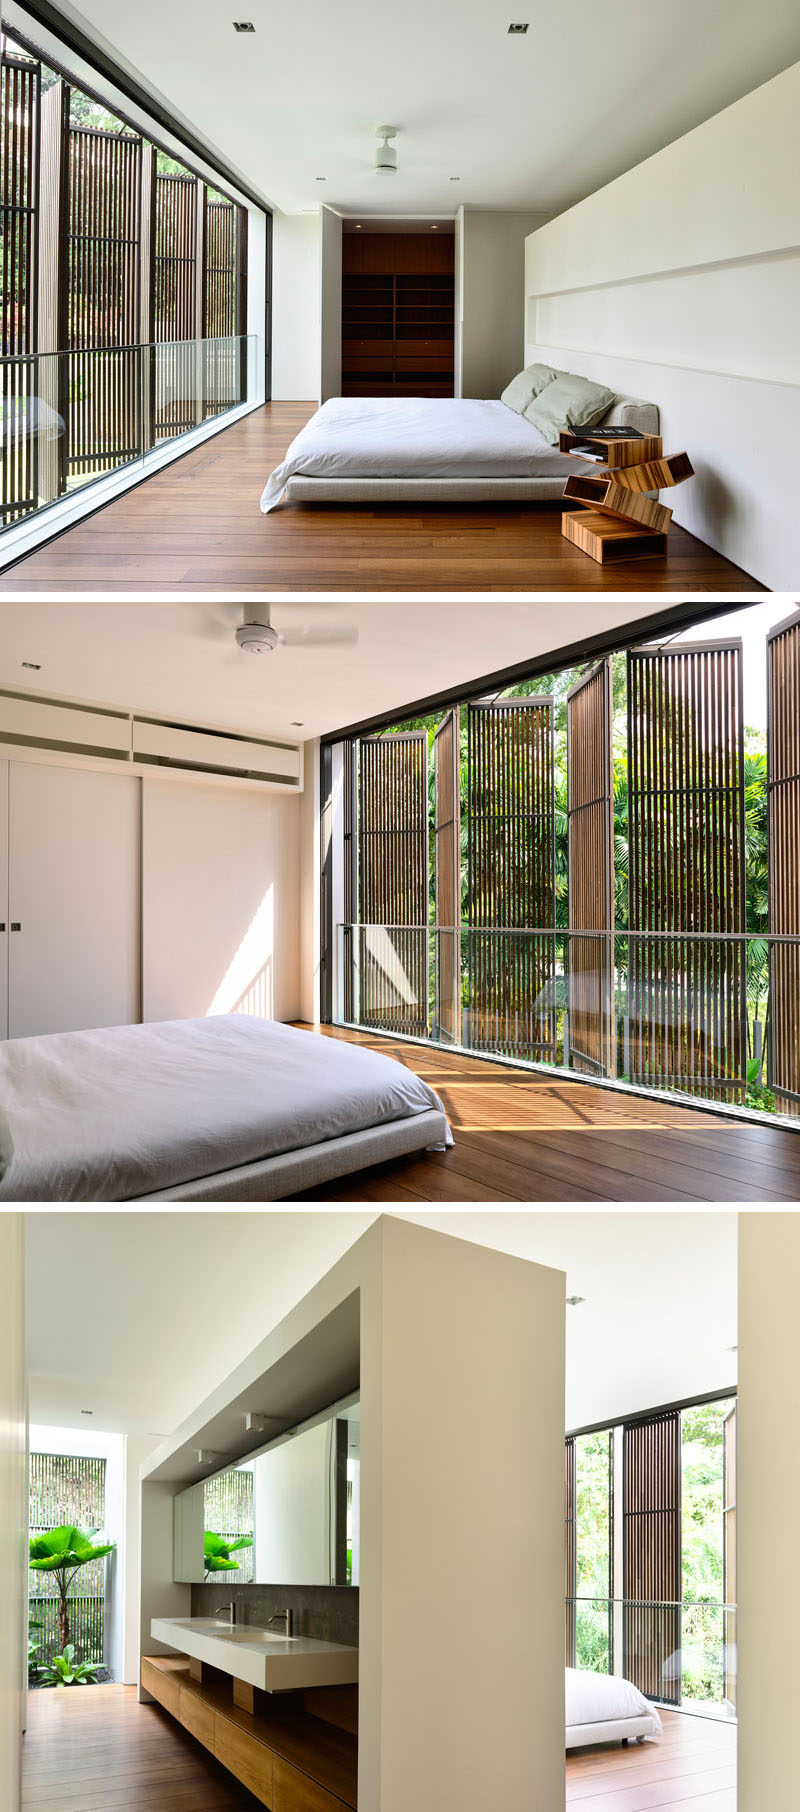 This bedroom has wooden shutters on the window for privacy, and the back of the headboard becomes the bathroom.